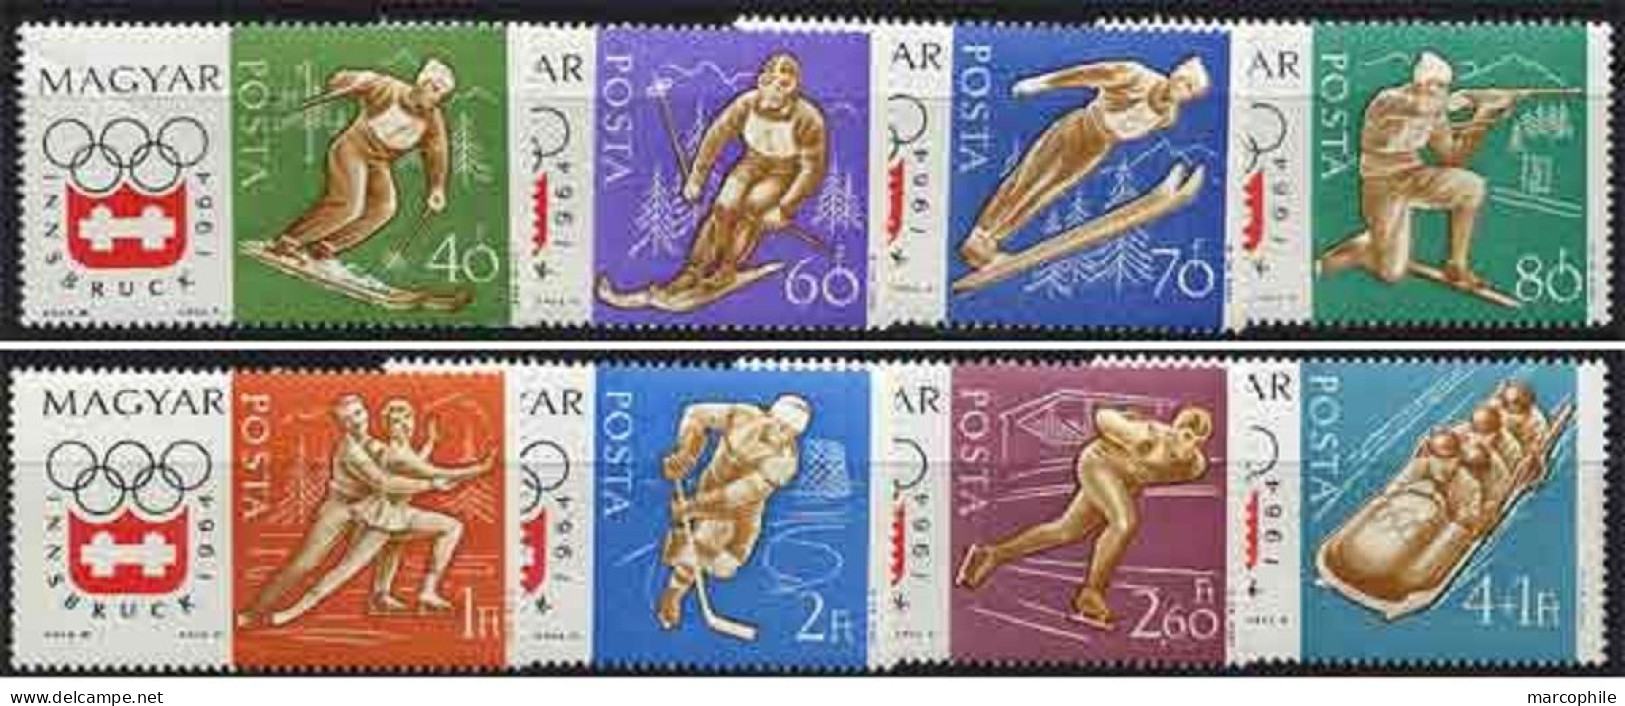 JEUX OLYMPIQUES HIVER INNSBRUCK / 1963 HONGRIE Serie # 1606 A 1613 ** / COTE 5.50 EURO (ref 6275d) - Inverno1964: Innsbruck